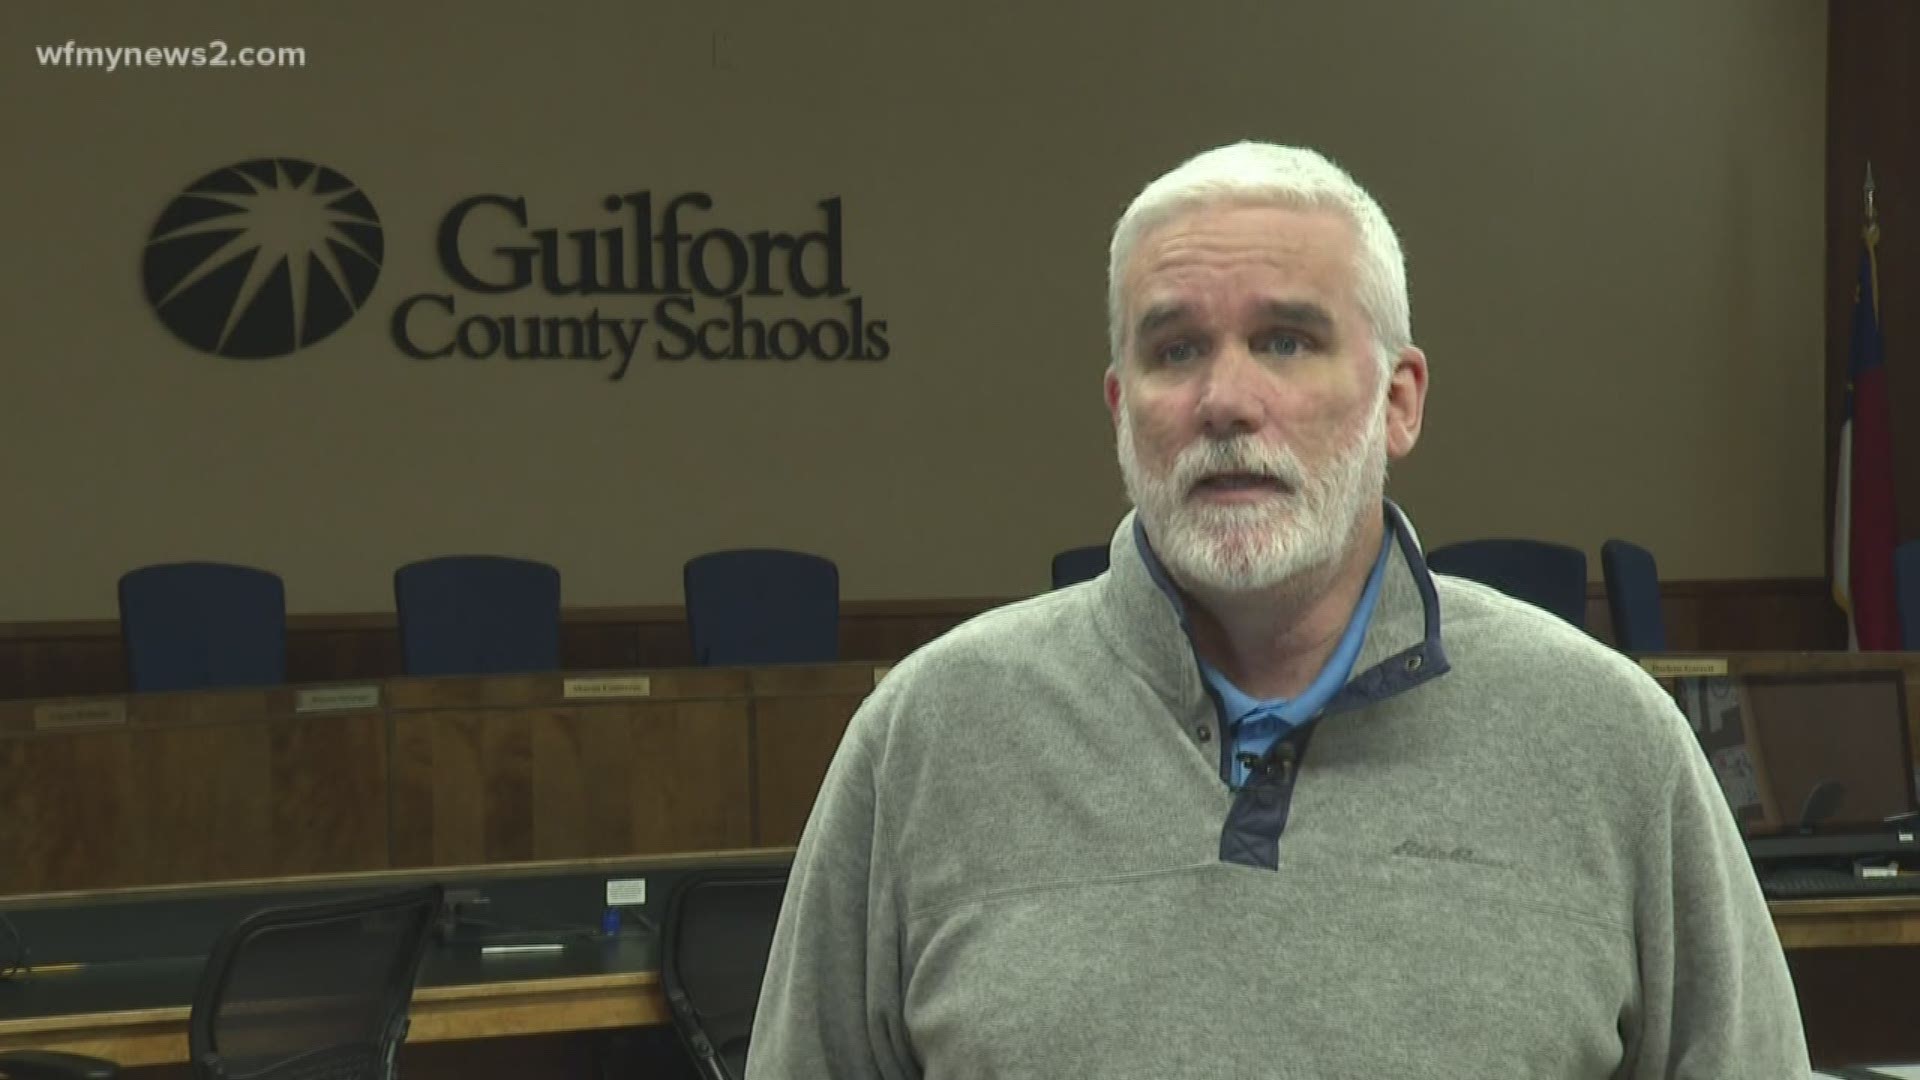 Guilford County Schools athletic director Leigh Hebbard says parents should model sportsmanship and positive behavior for children at sporting events.